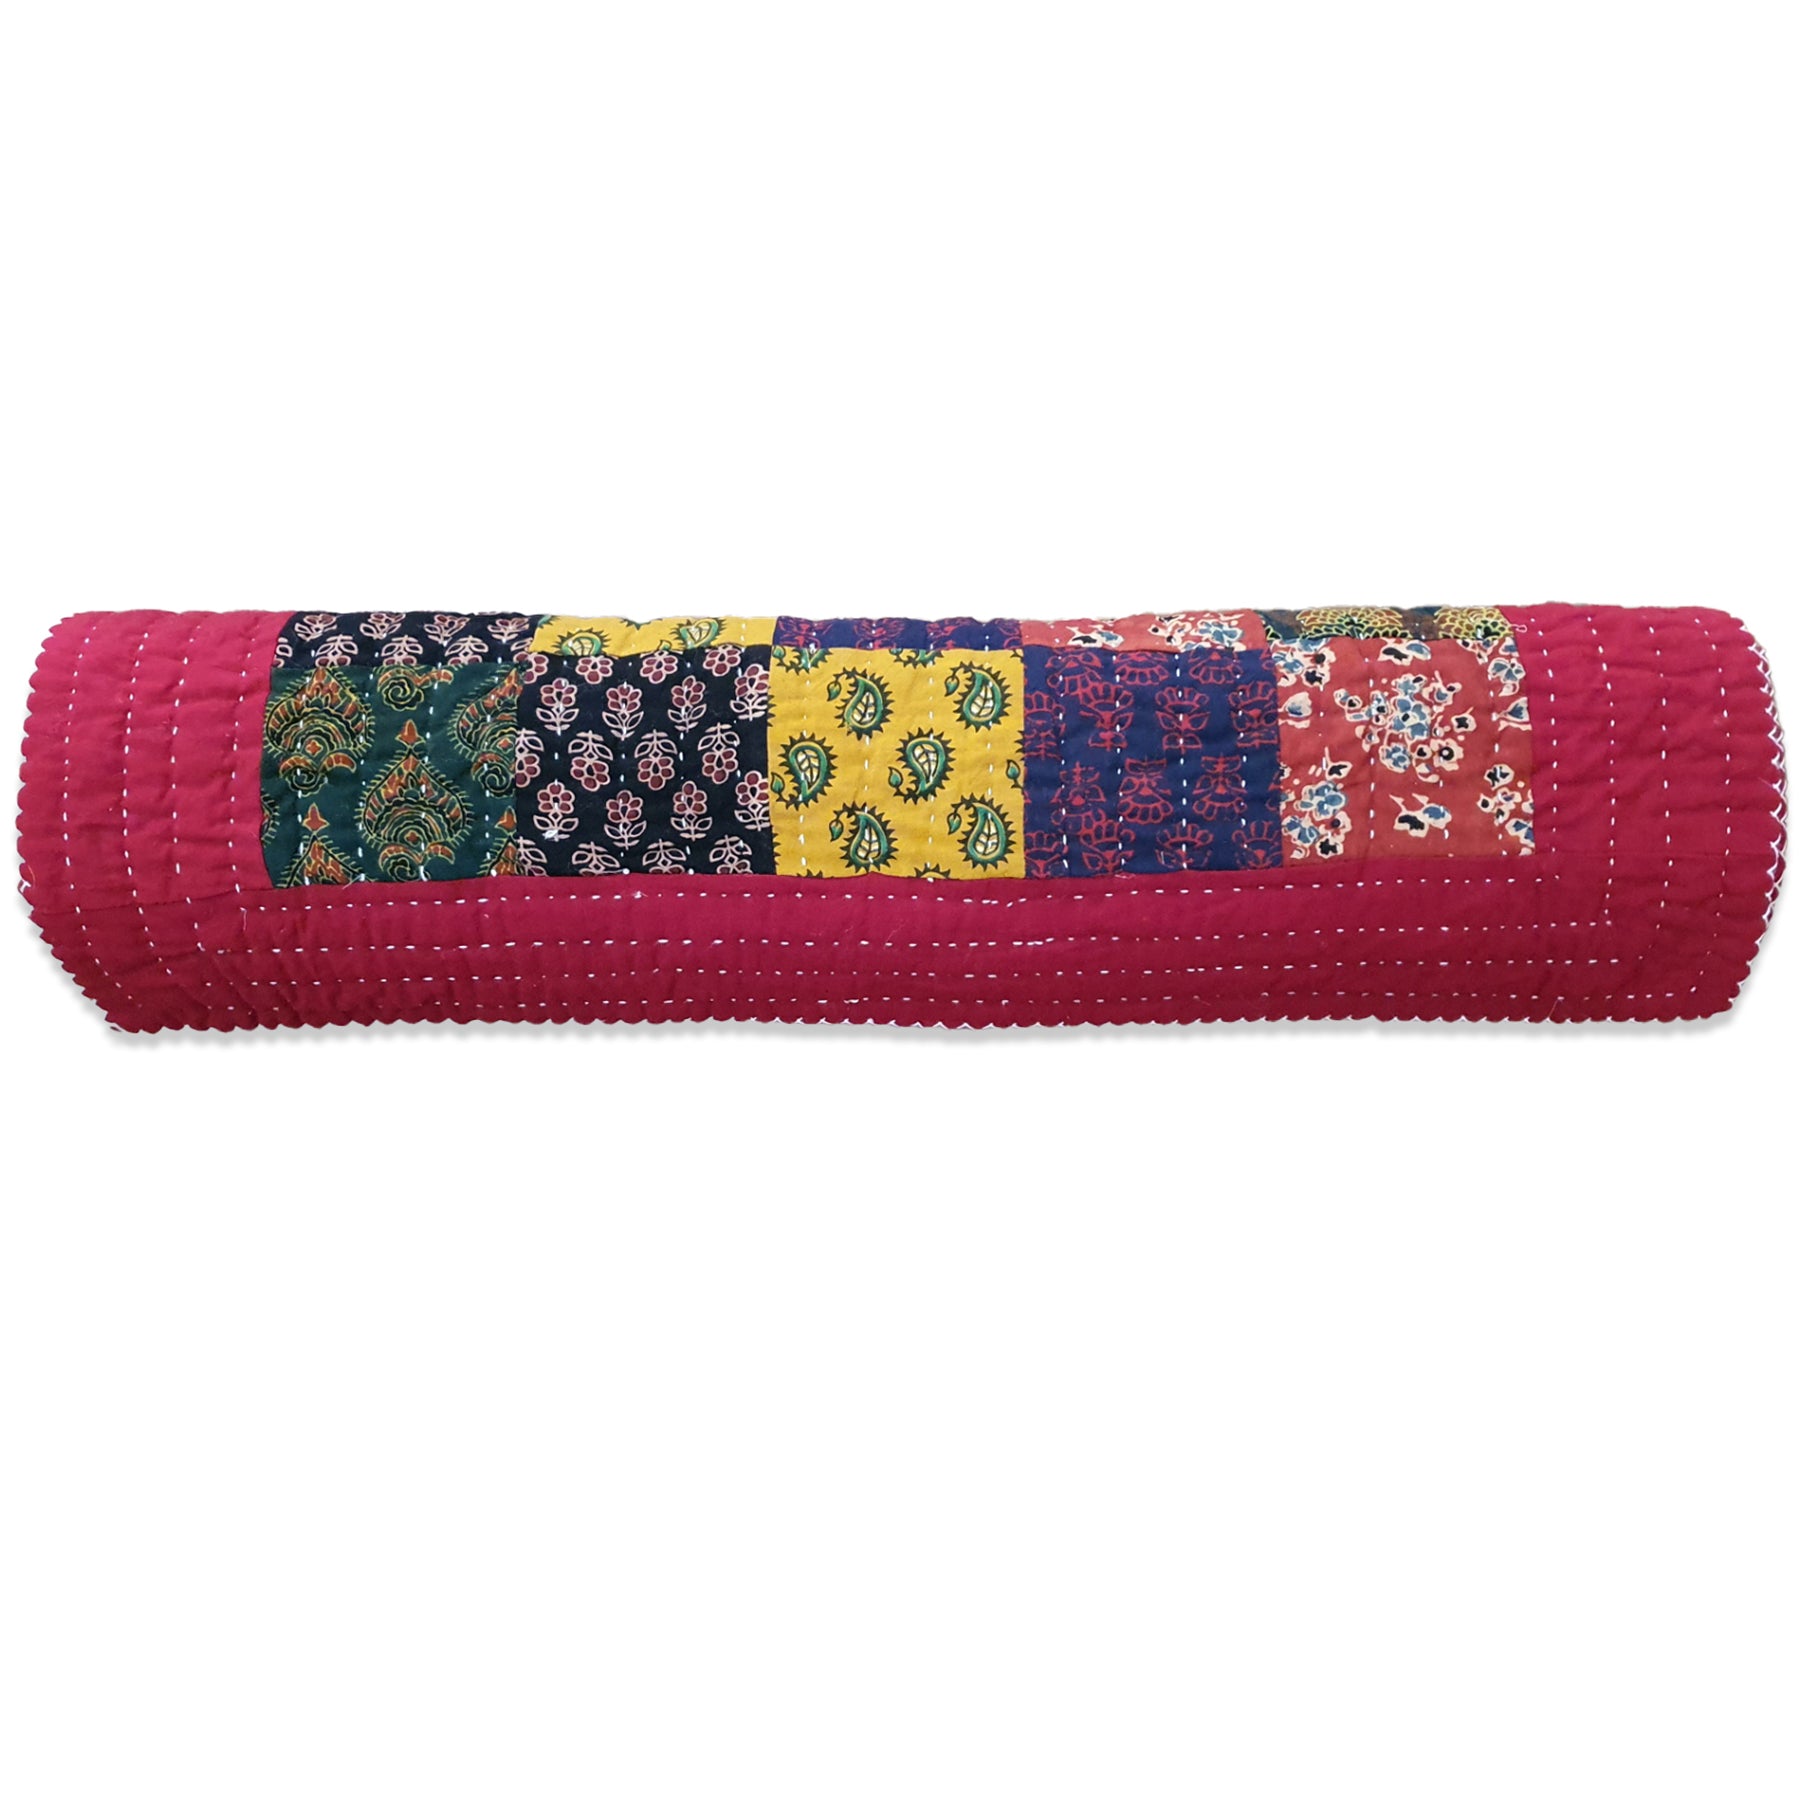 Most Exquisite Handcrafted Cotton Yoga Mats in Town